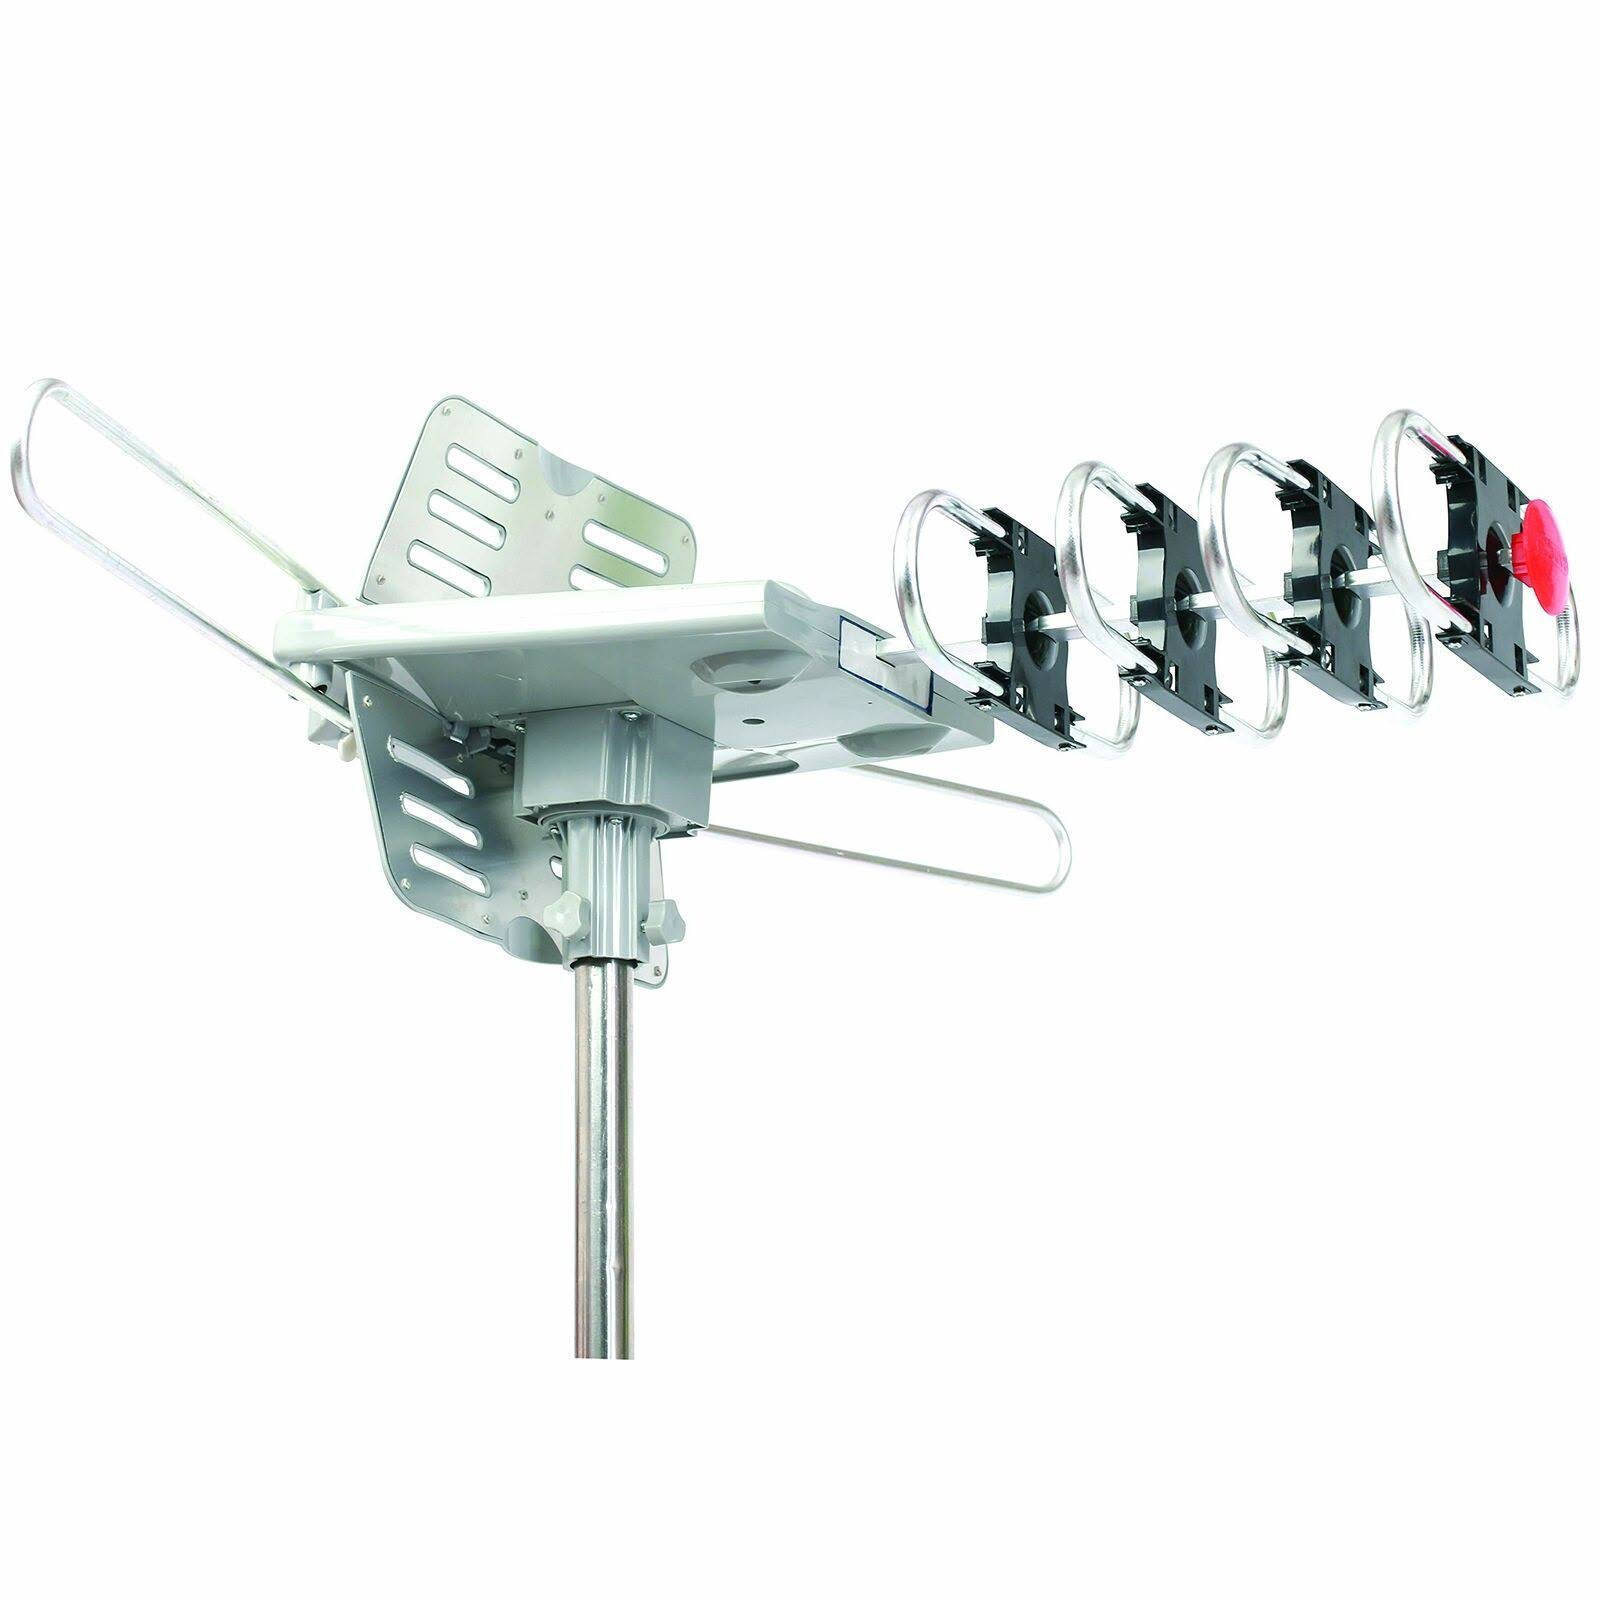 Supersonic Sc613 Hdtv Digital Amplified Motorized Rotating Outdoor Antenna - 360 Degree